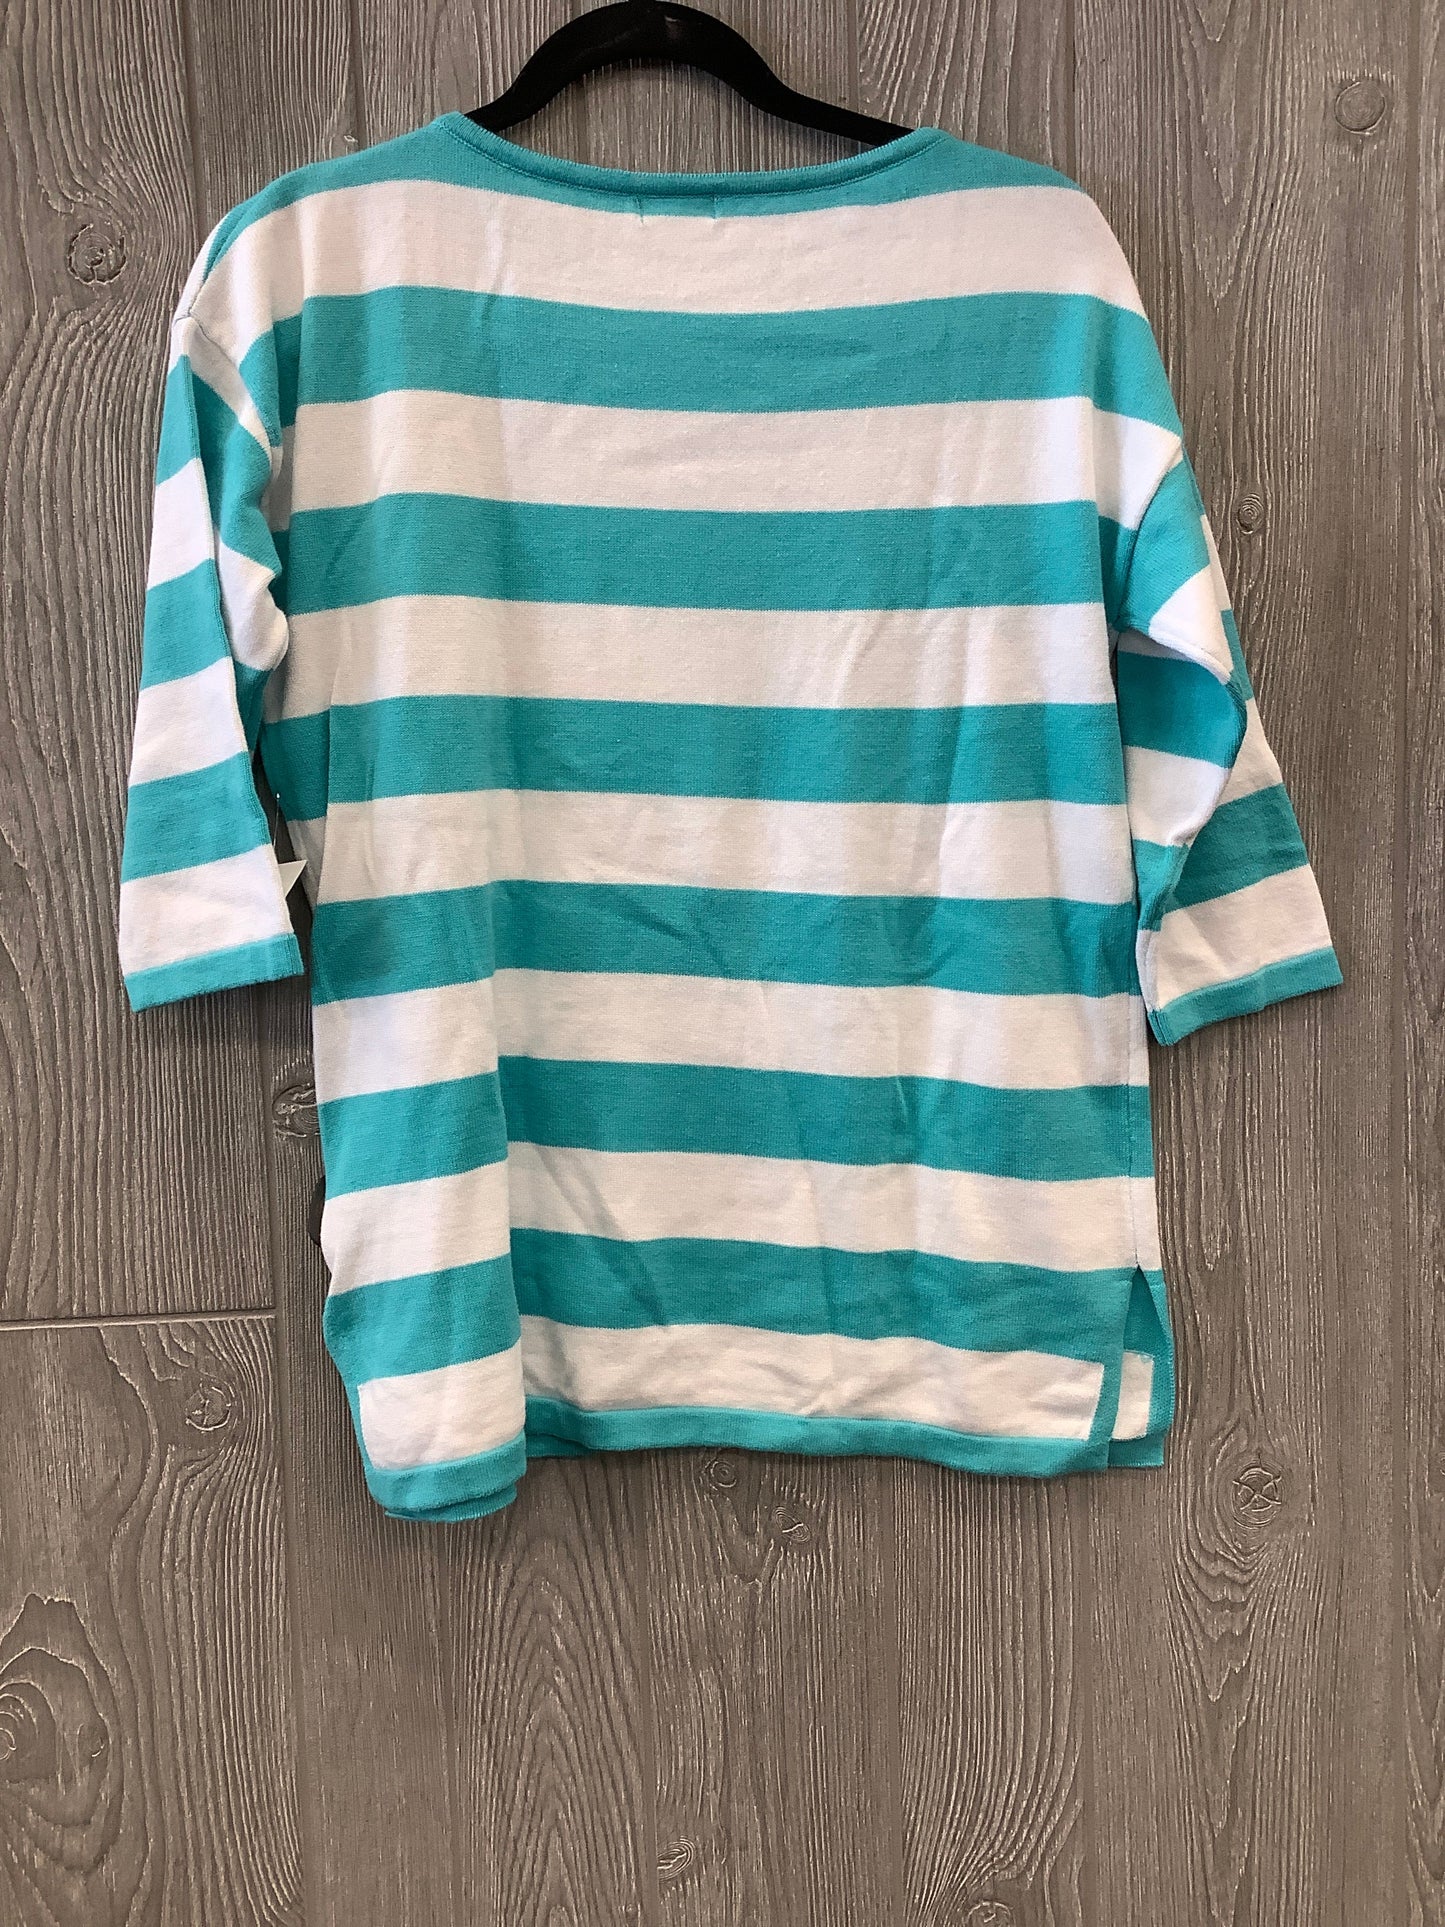 Blue Top 3/4 Sleeve Clothes Mentor, Size Petite   S